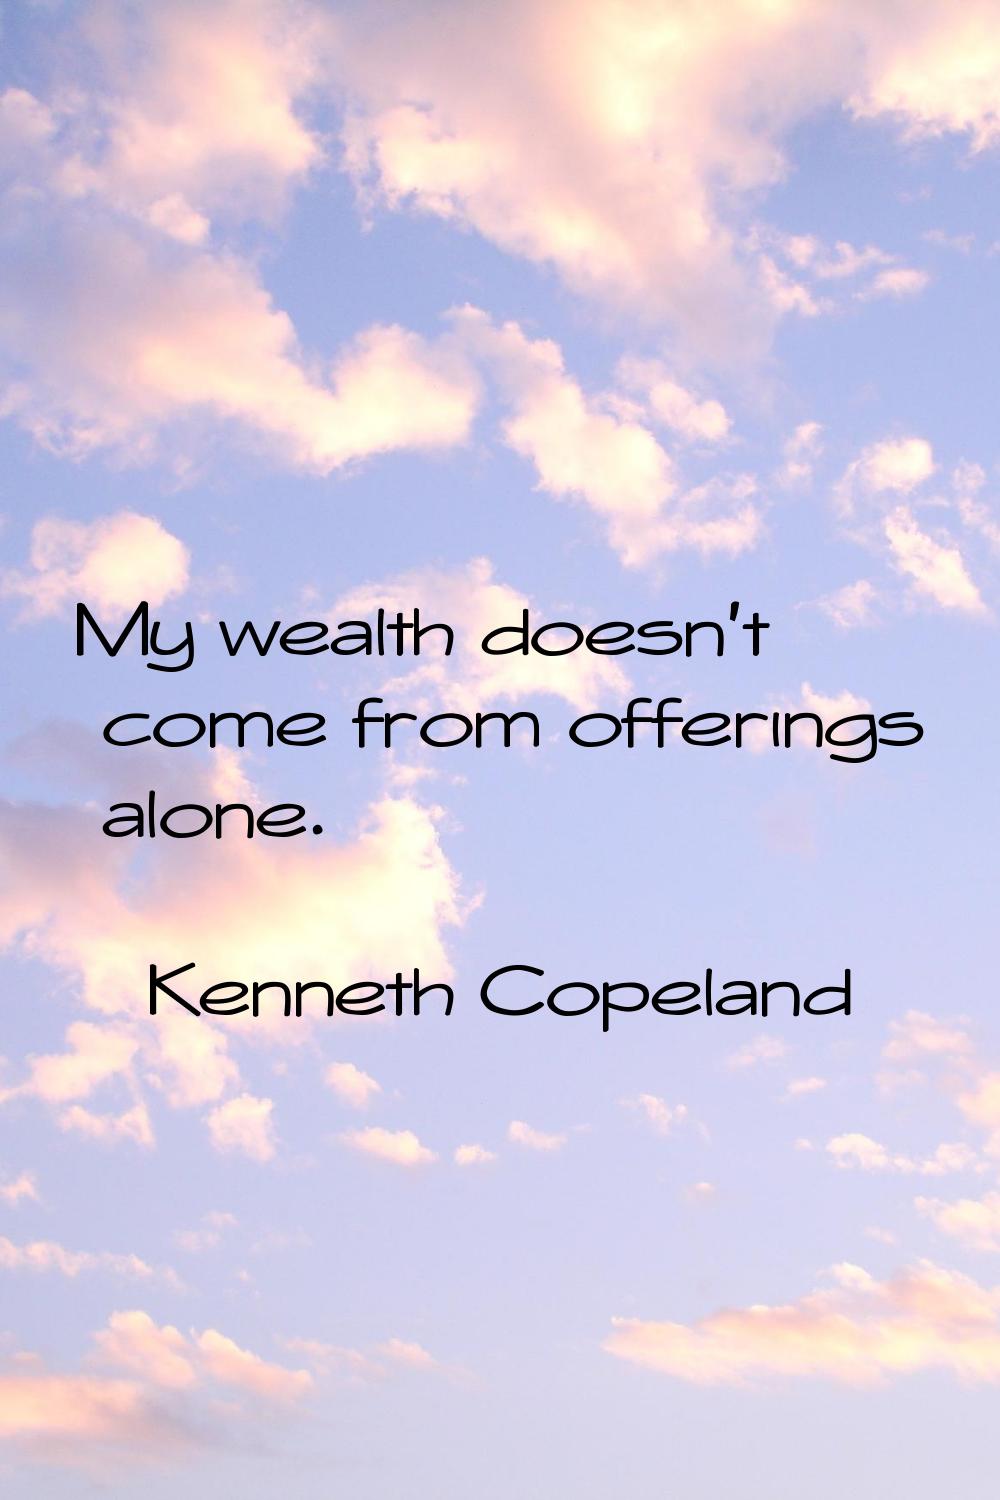 My wealth doesn't come from offerings alone.